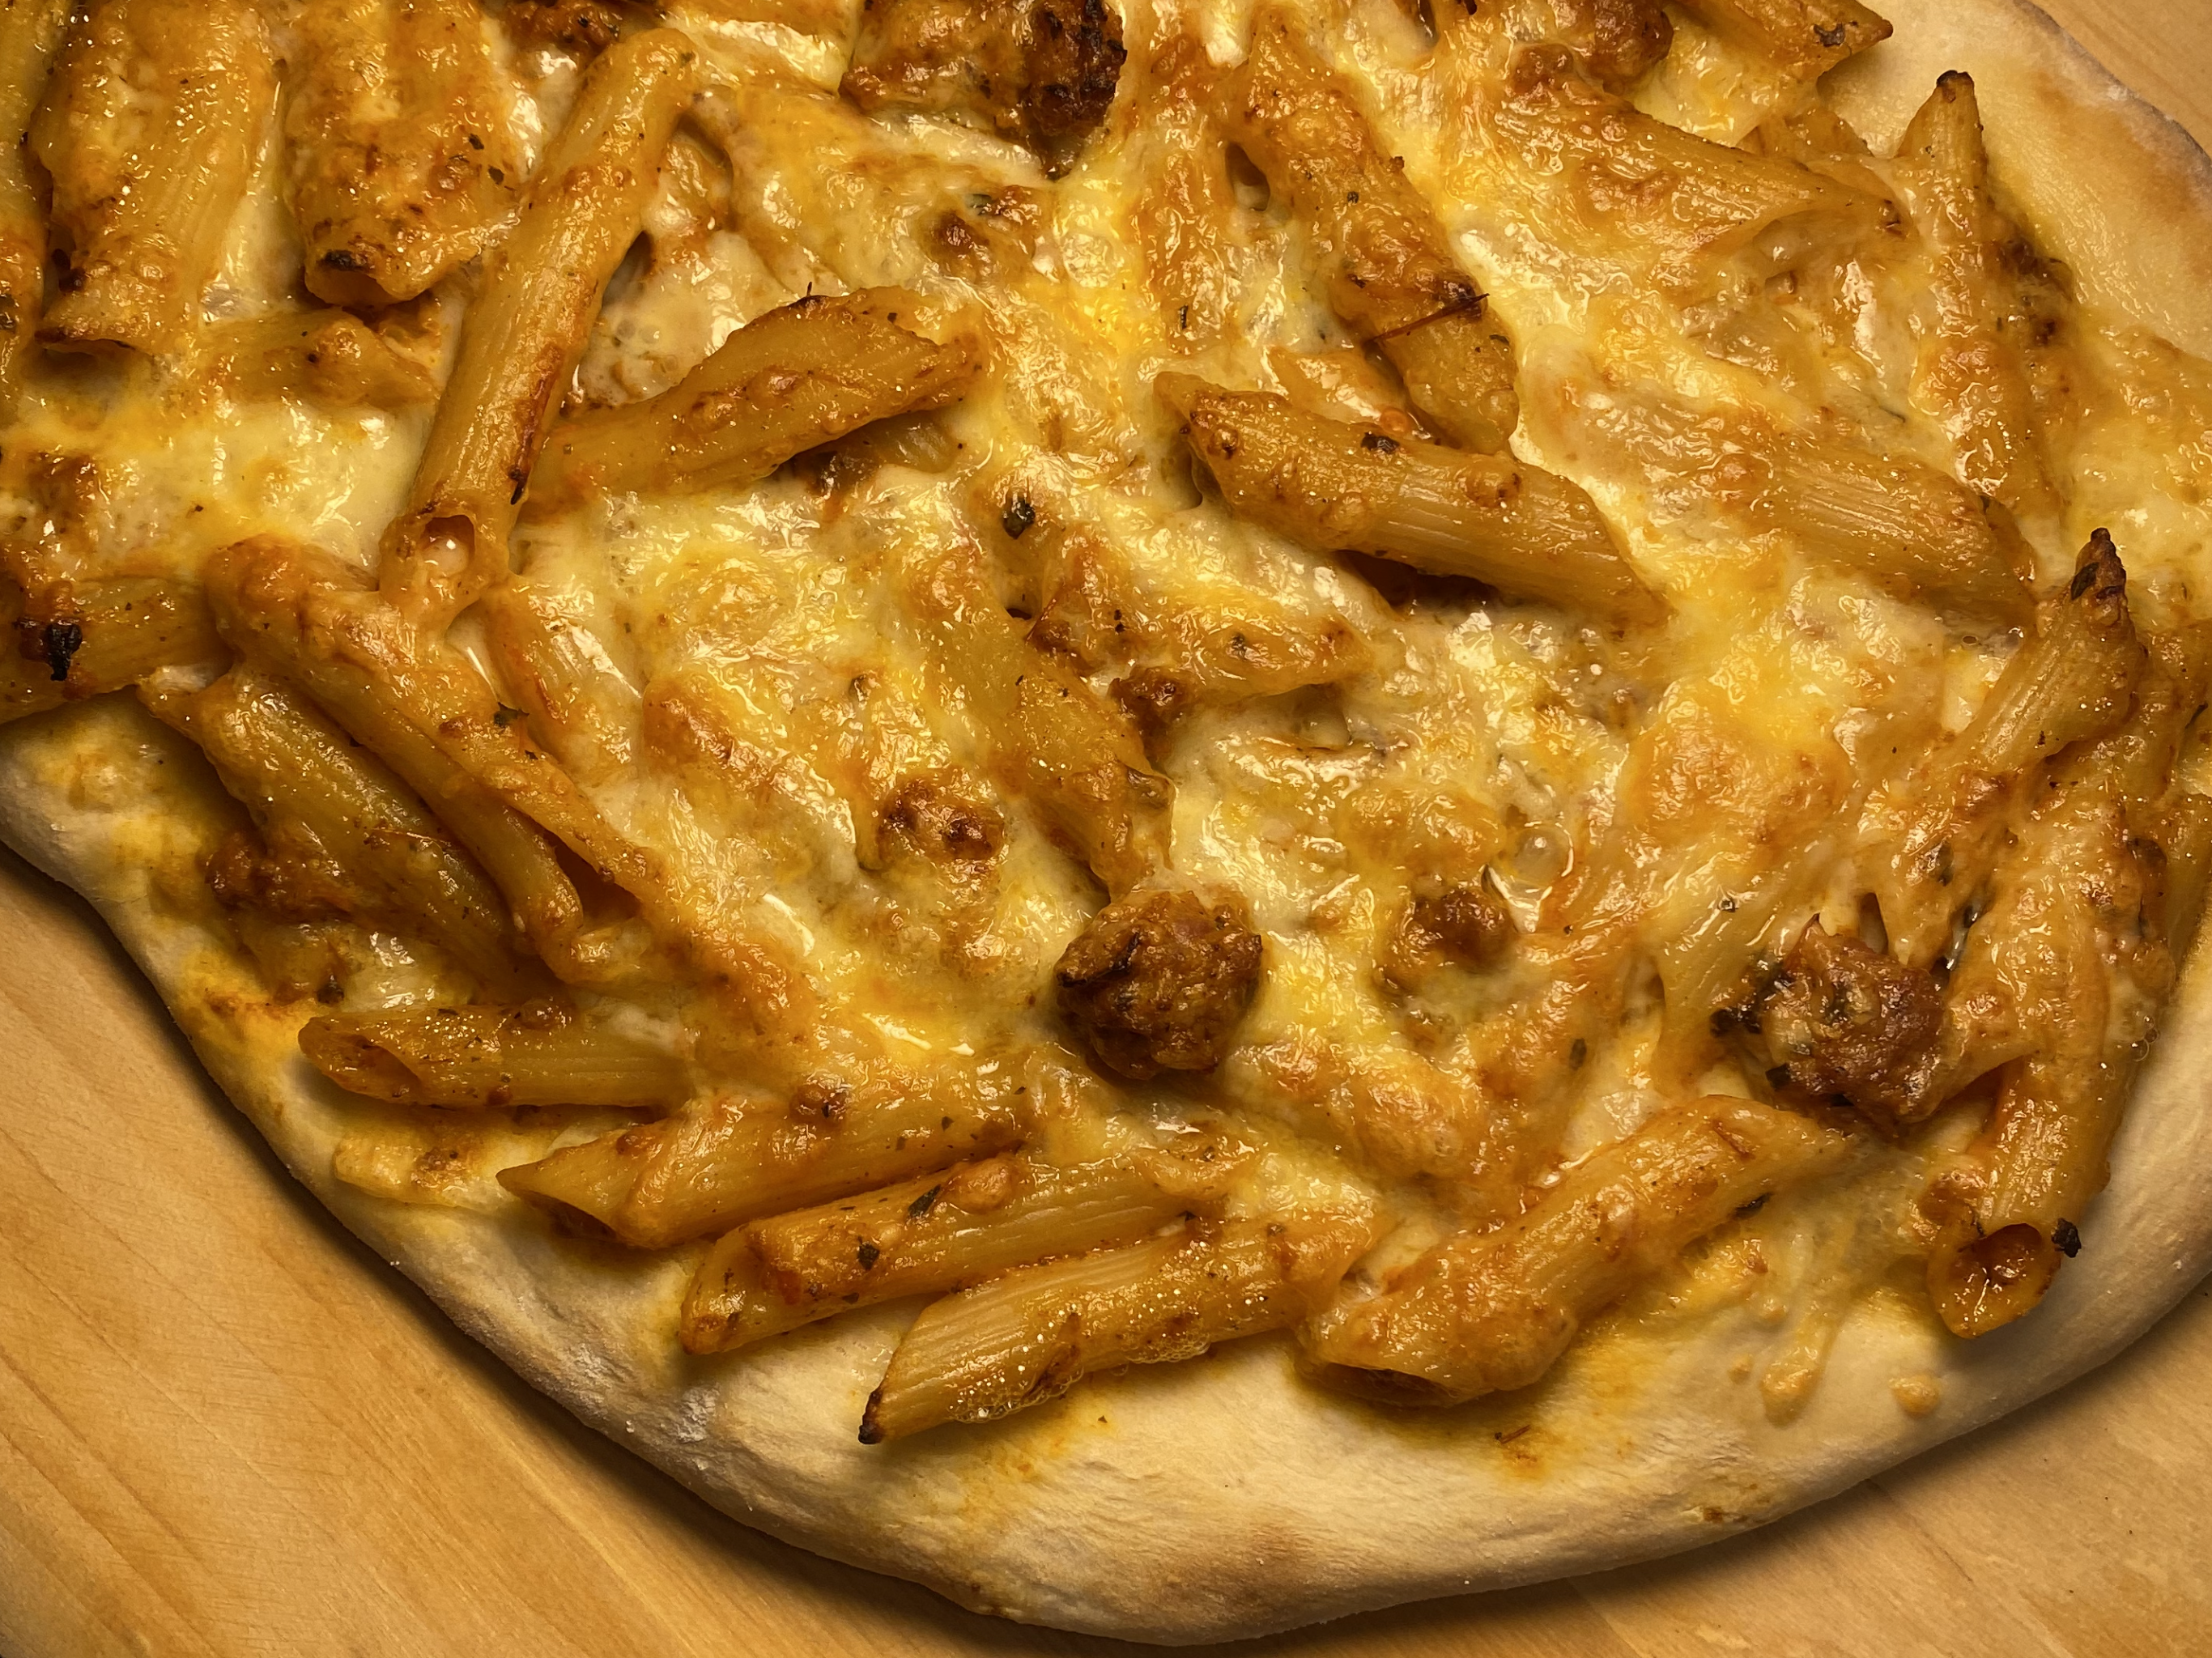 E2C93B9E EADE 4419 B6C4 598013EBCE01 - Mind-Blowing Loaded Penne Vodka Pizza with Smoked Gouda